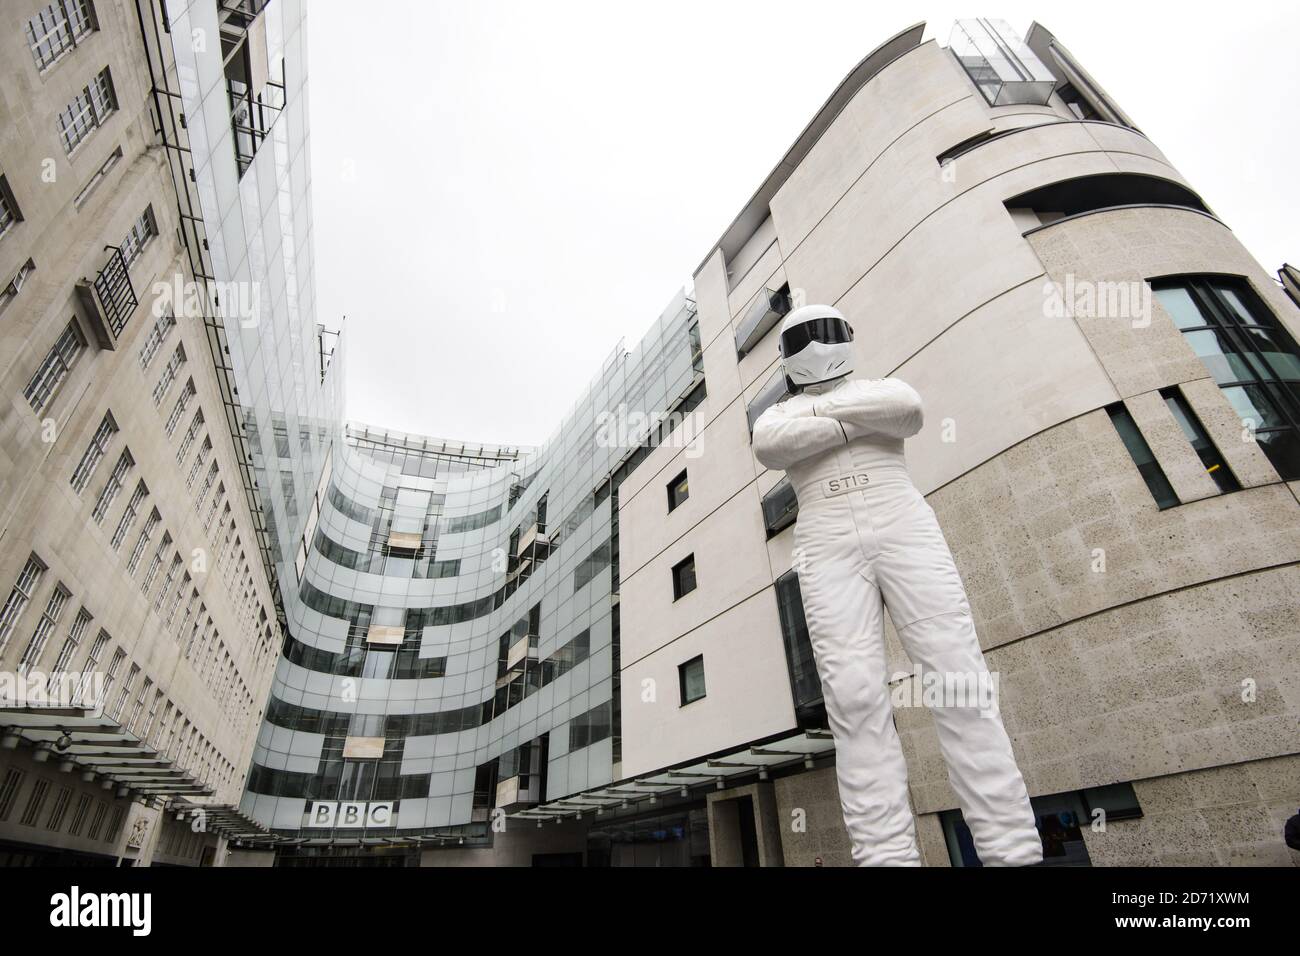 A giant statue of The Stig stands outside BBC Broadcasting House in central London, ahead of the new series of Top Gear which airs later this month. Stock Photo